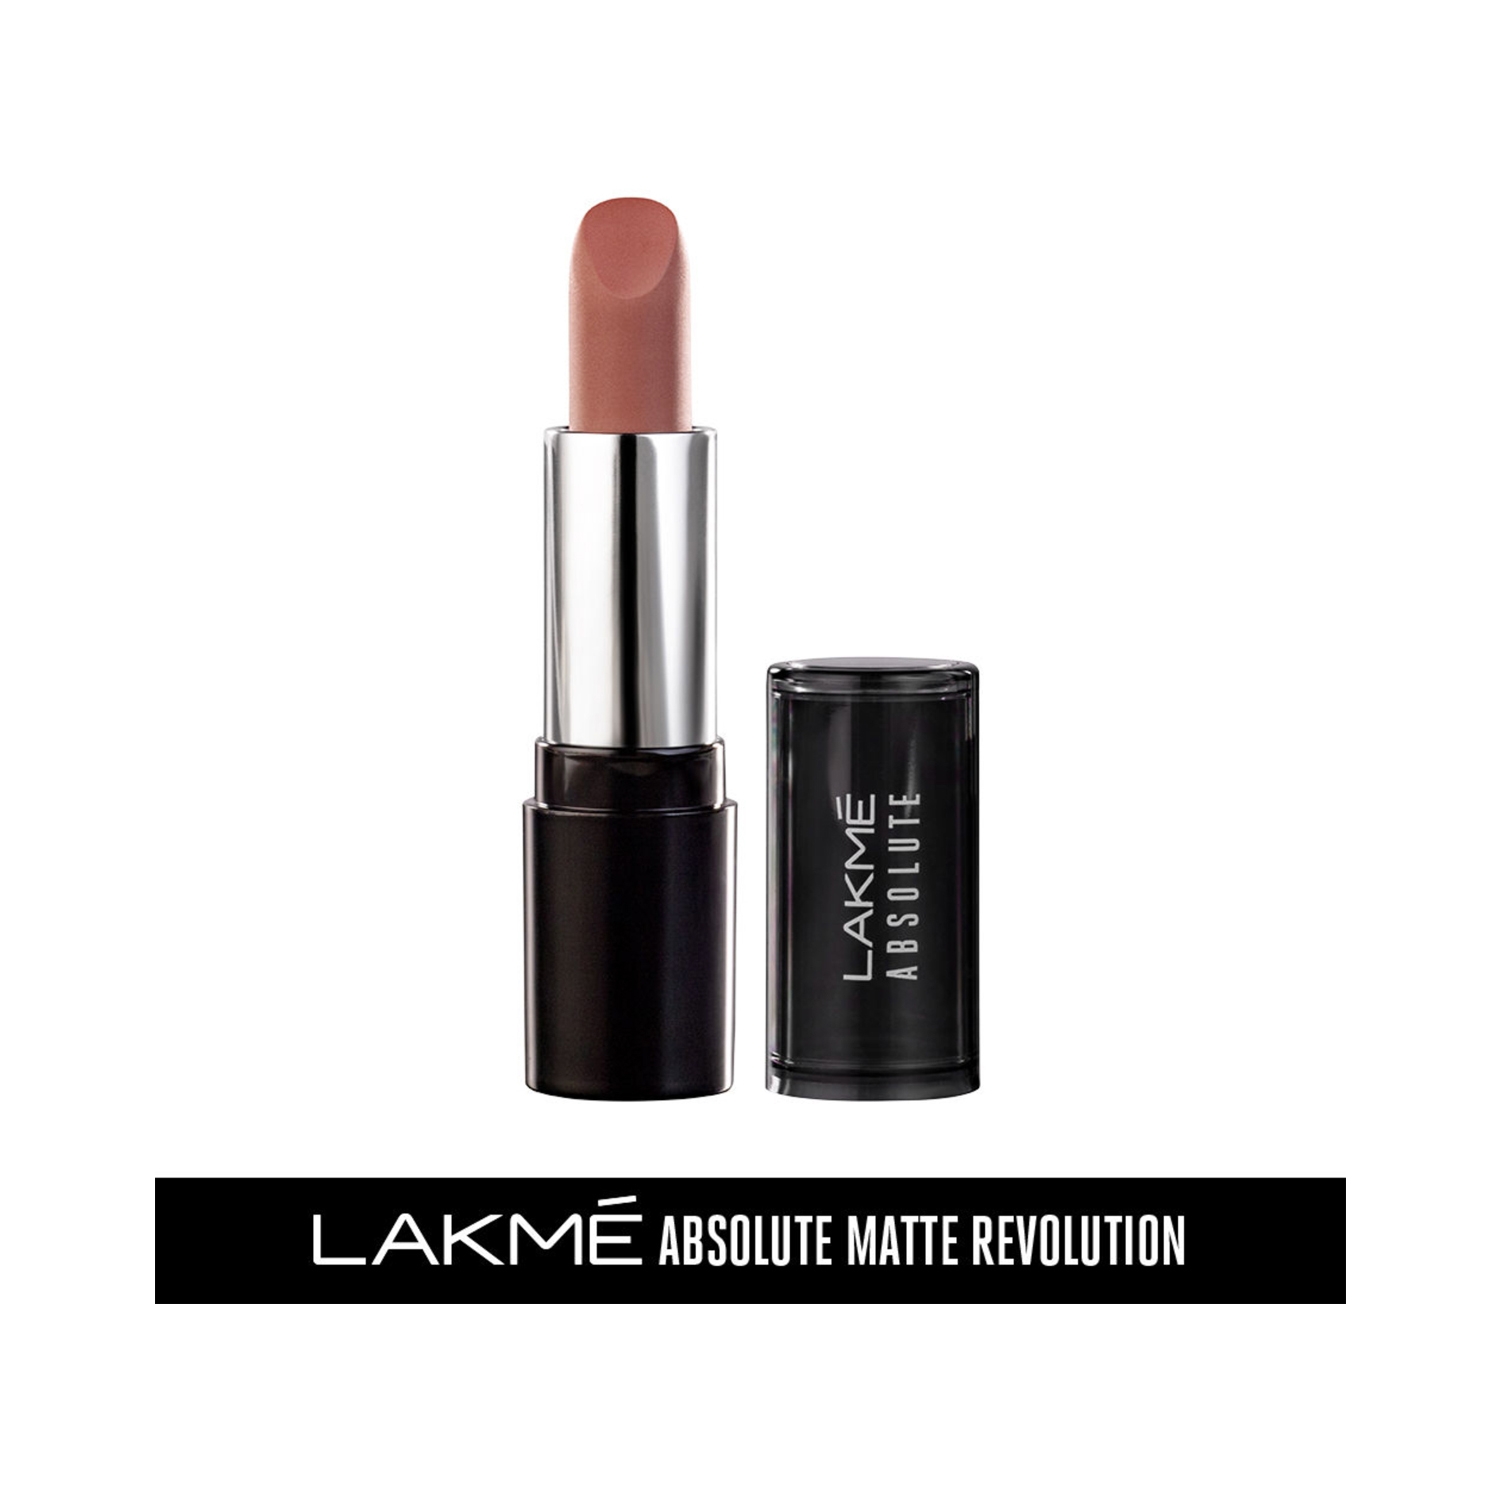 Lakme | Lakme Absolute Matte Revolution Lip Color - 301 Morning Coffee (3.5g)